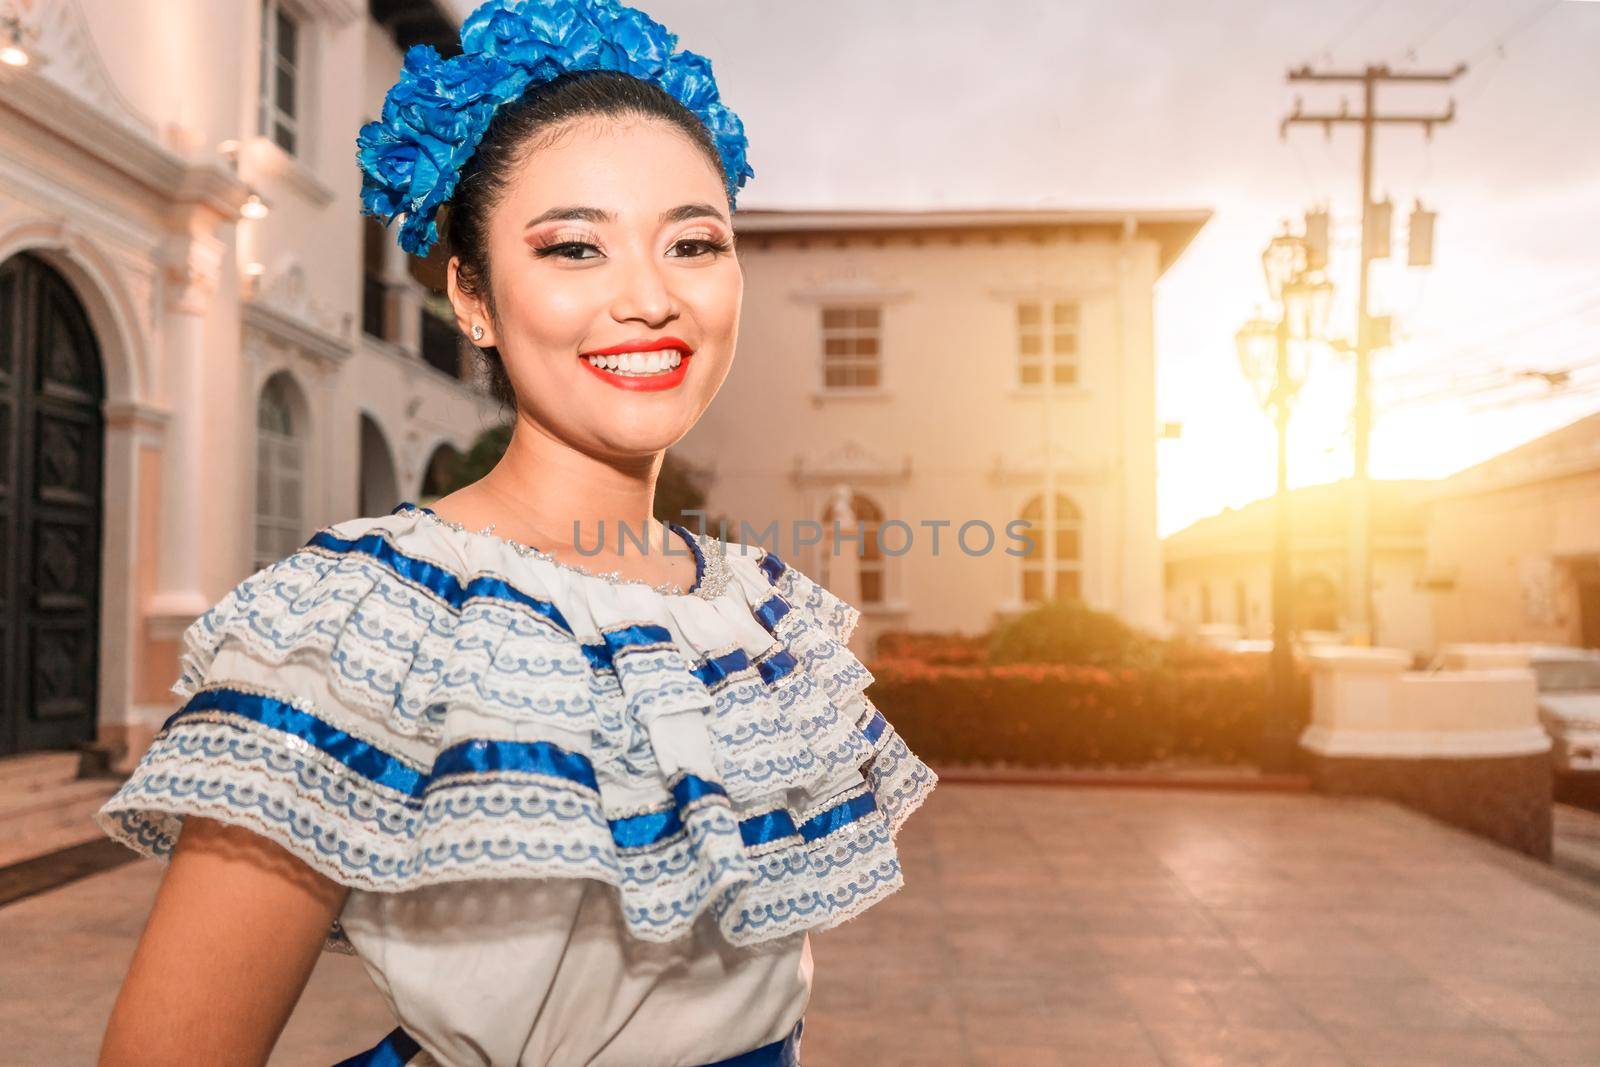 Traditional dancer from Nicaragua. Latin girl smiling with the traditional dress of Mexico, Central and South America, looking at the camera at sunset.